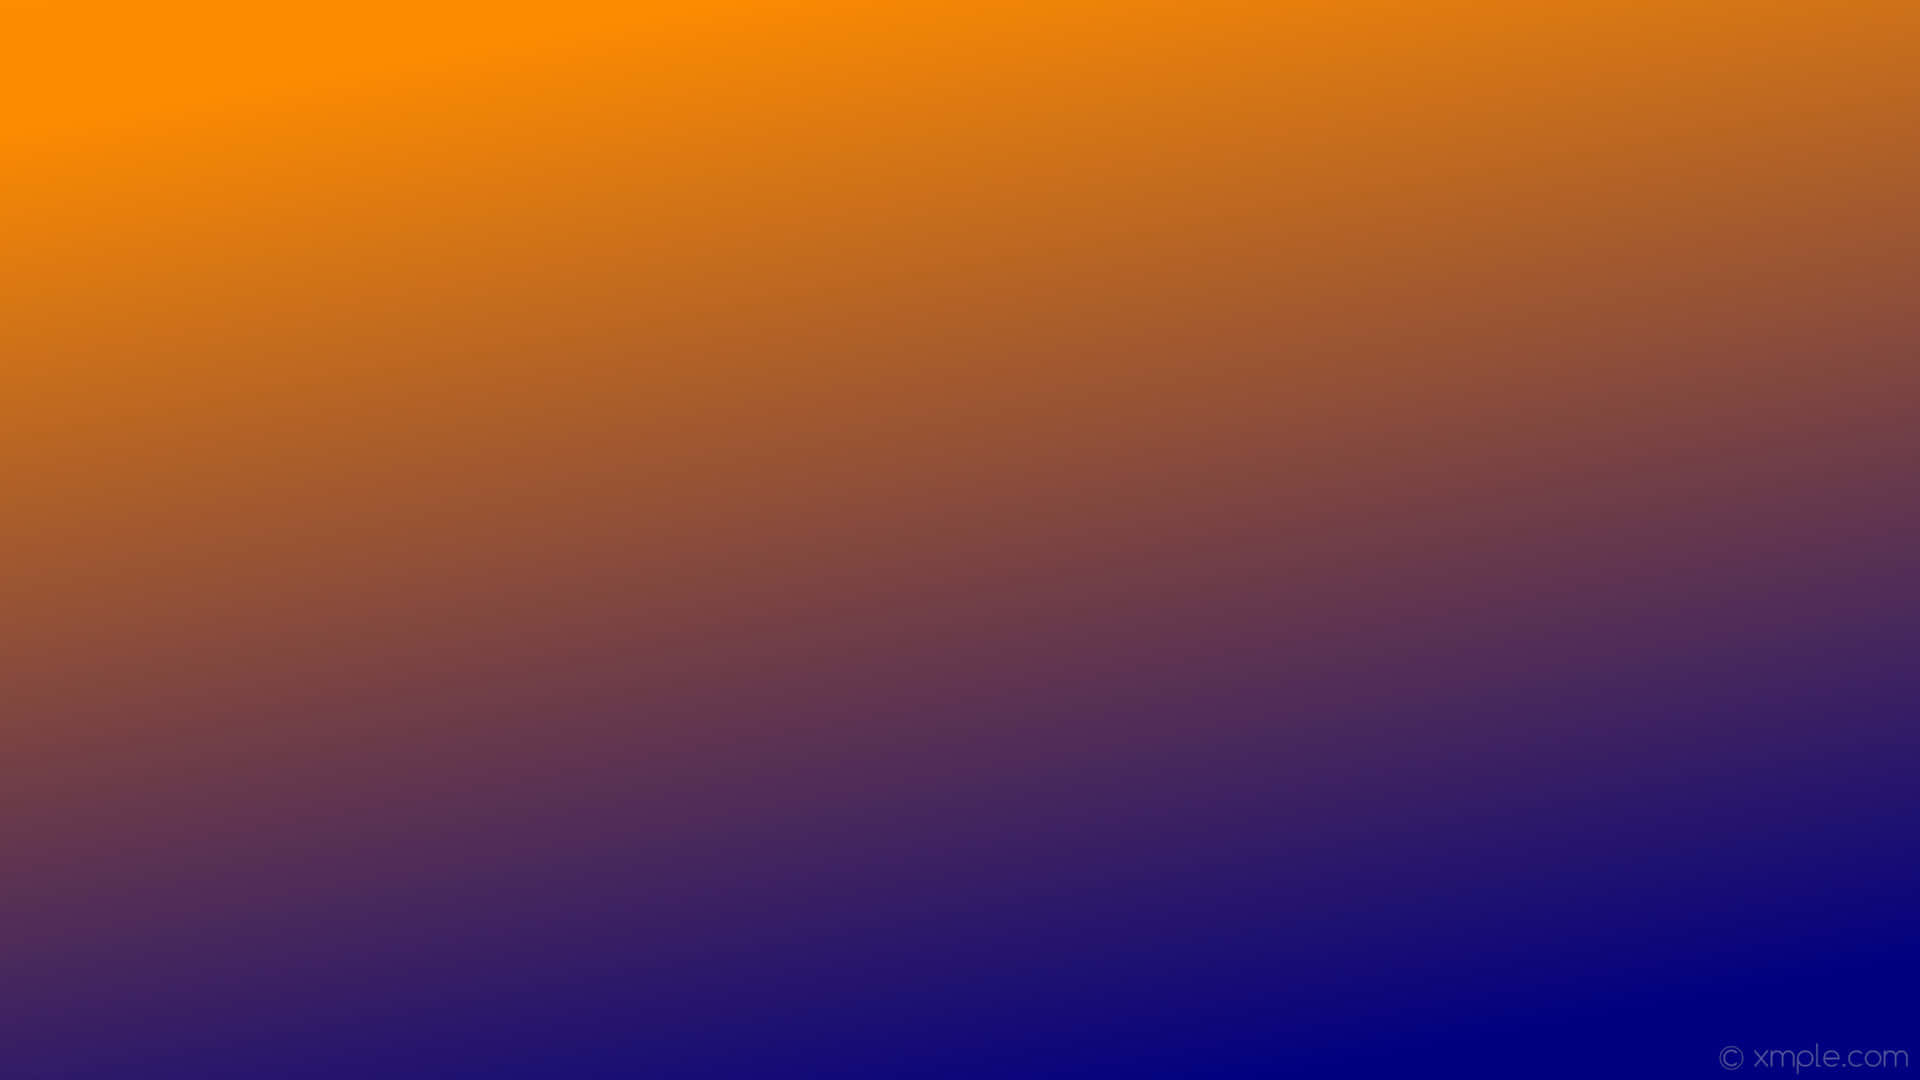 An Orange And Blue Background With A Gradient